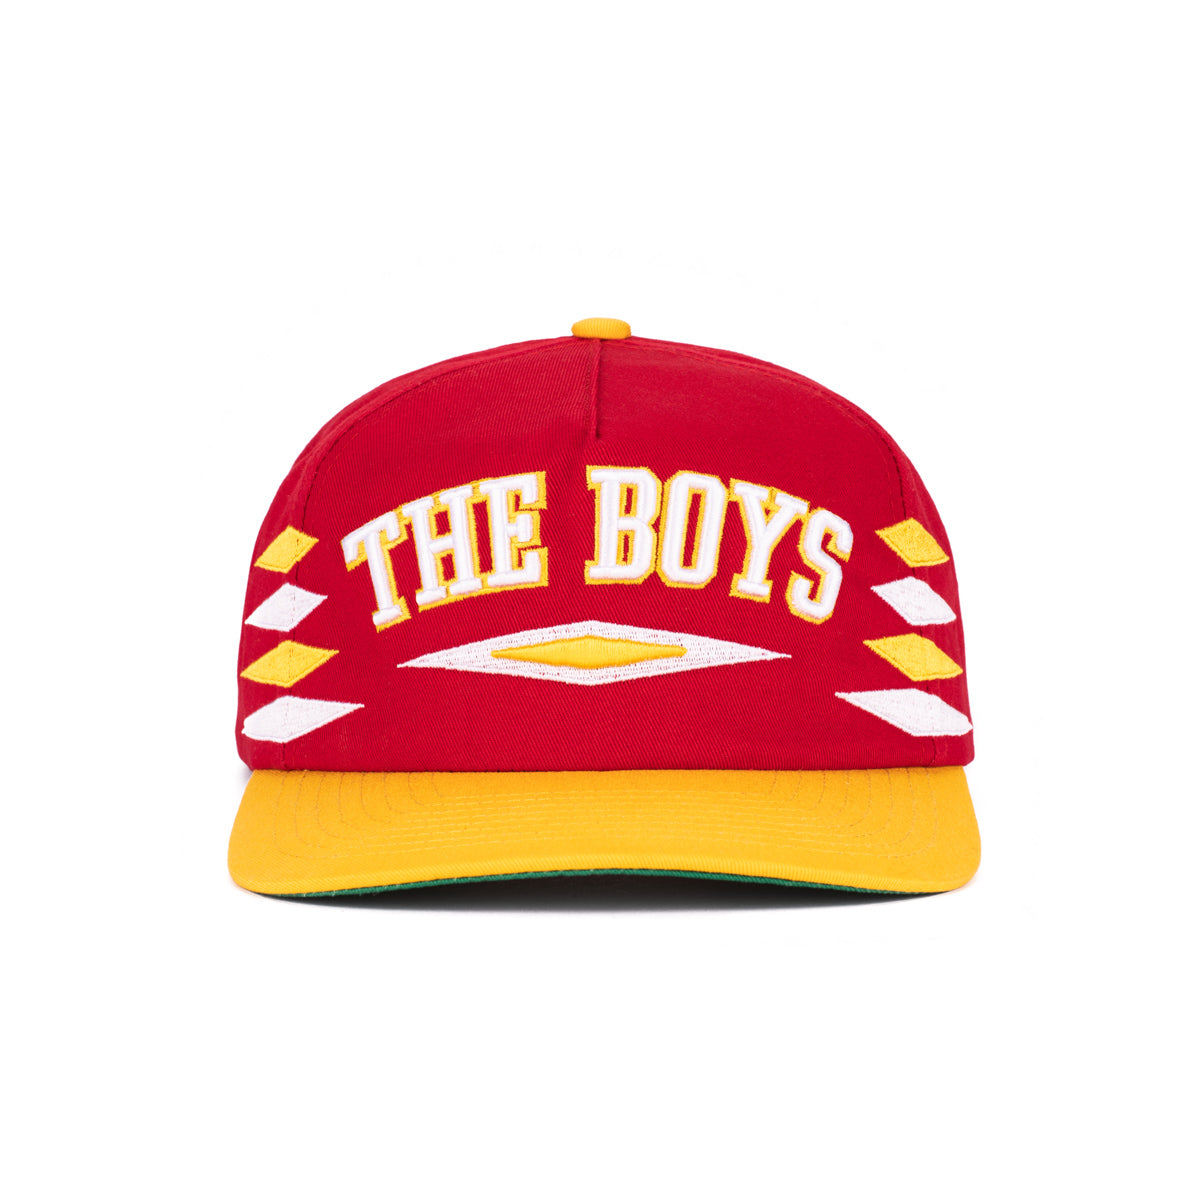 The Boys Diamond Retro Hat-Hats-Bussin With The Boys-Red/Yellow-Barstool Sports